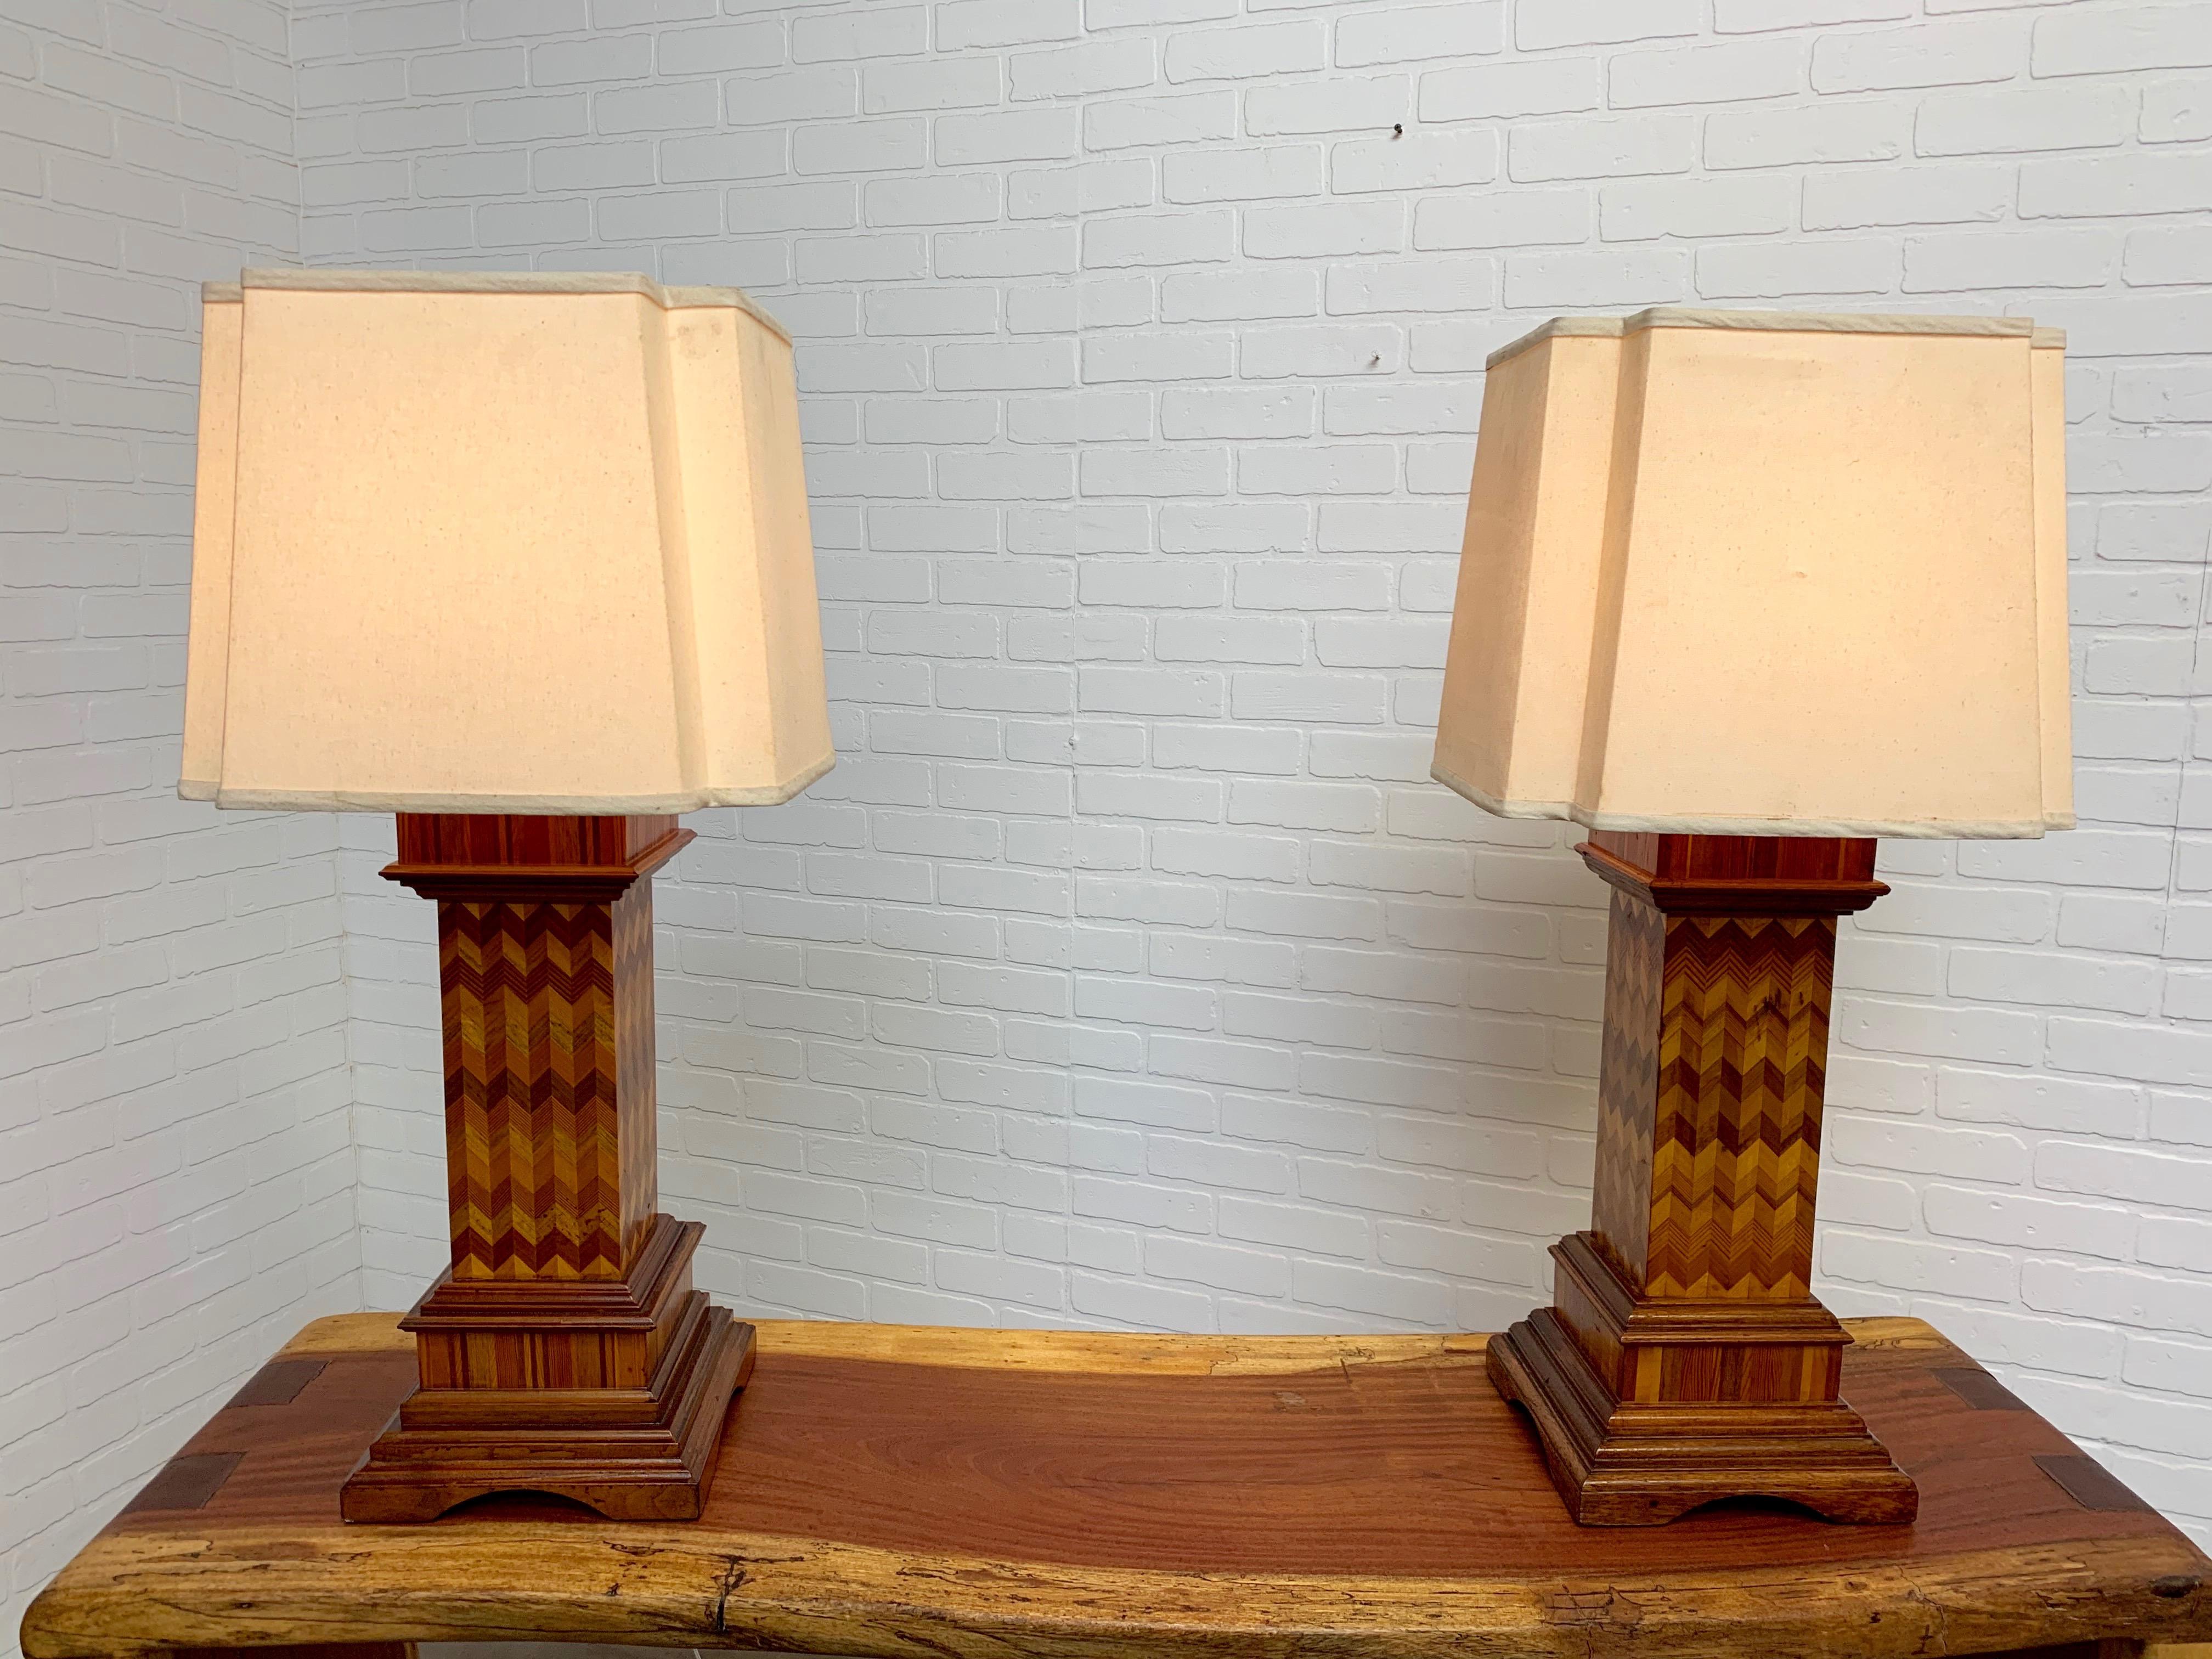 Antique Wood Lamps Made of Architectural Elements 4